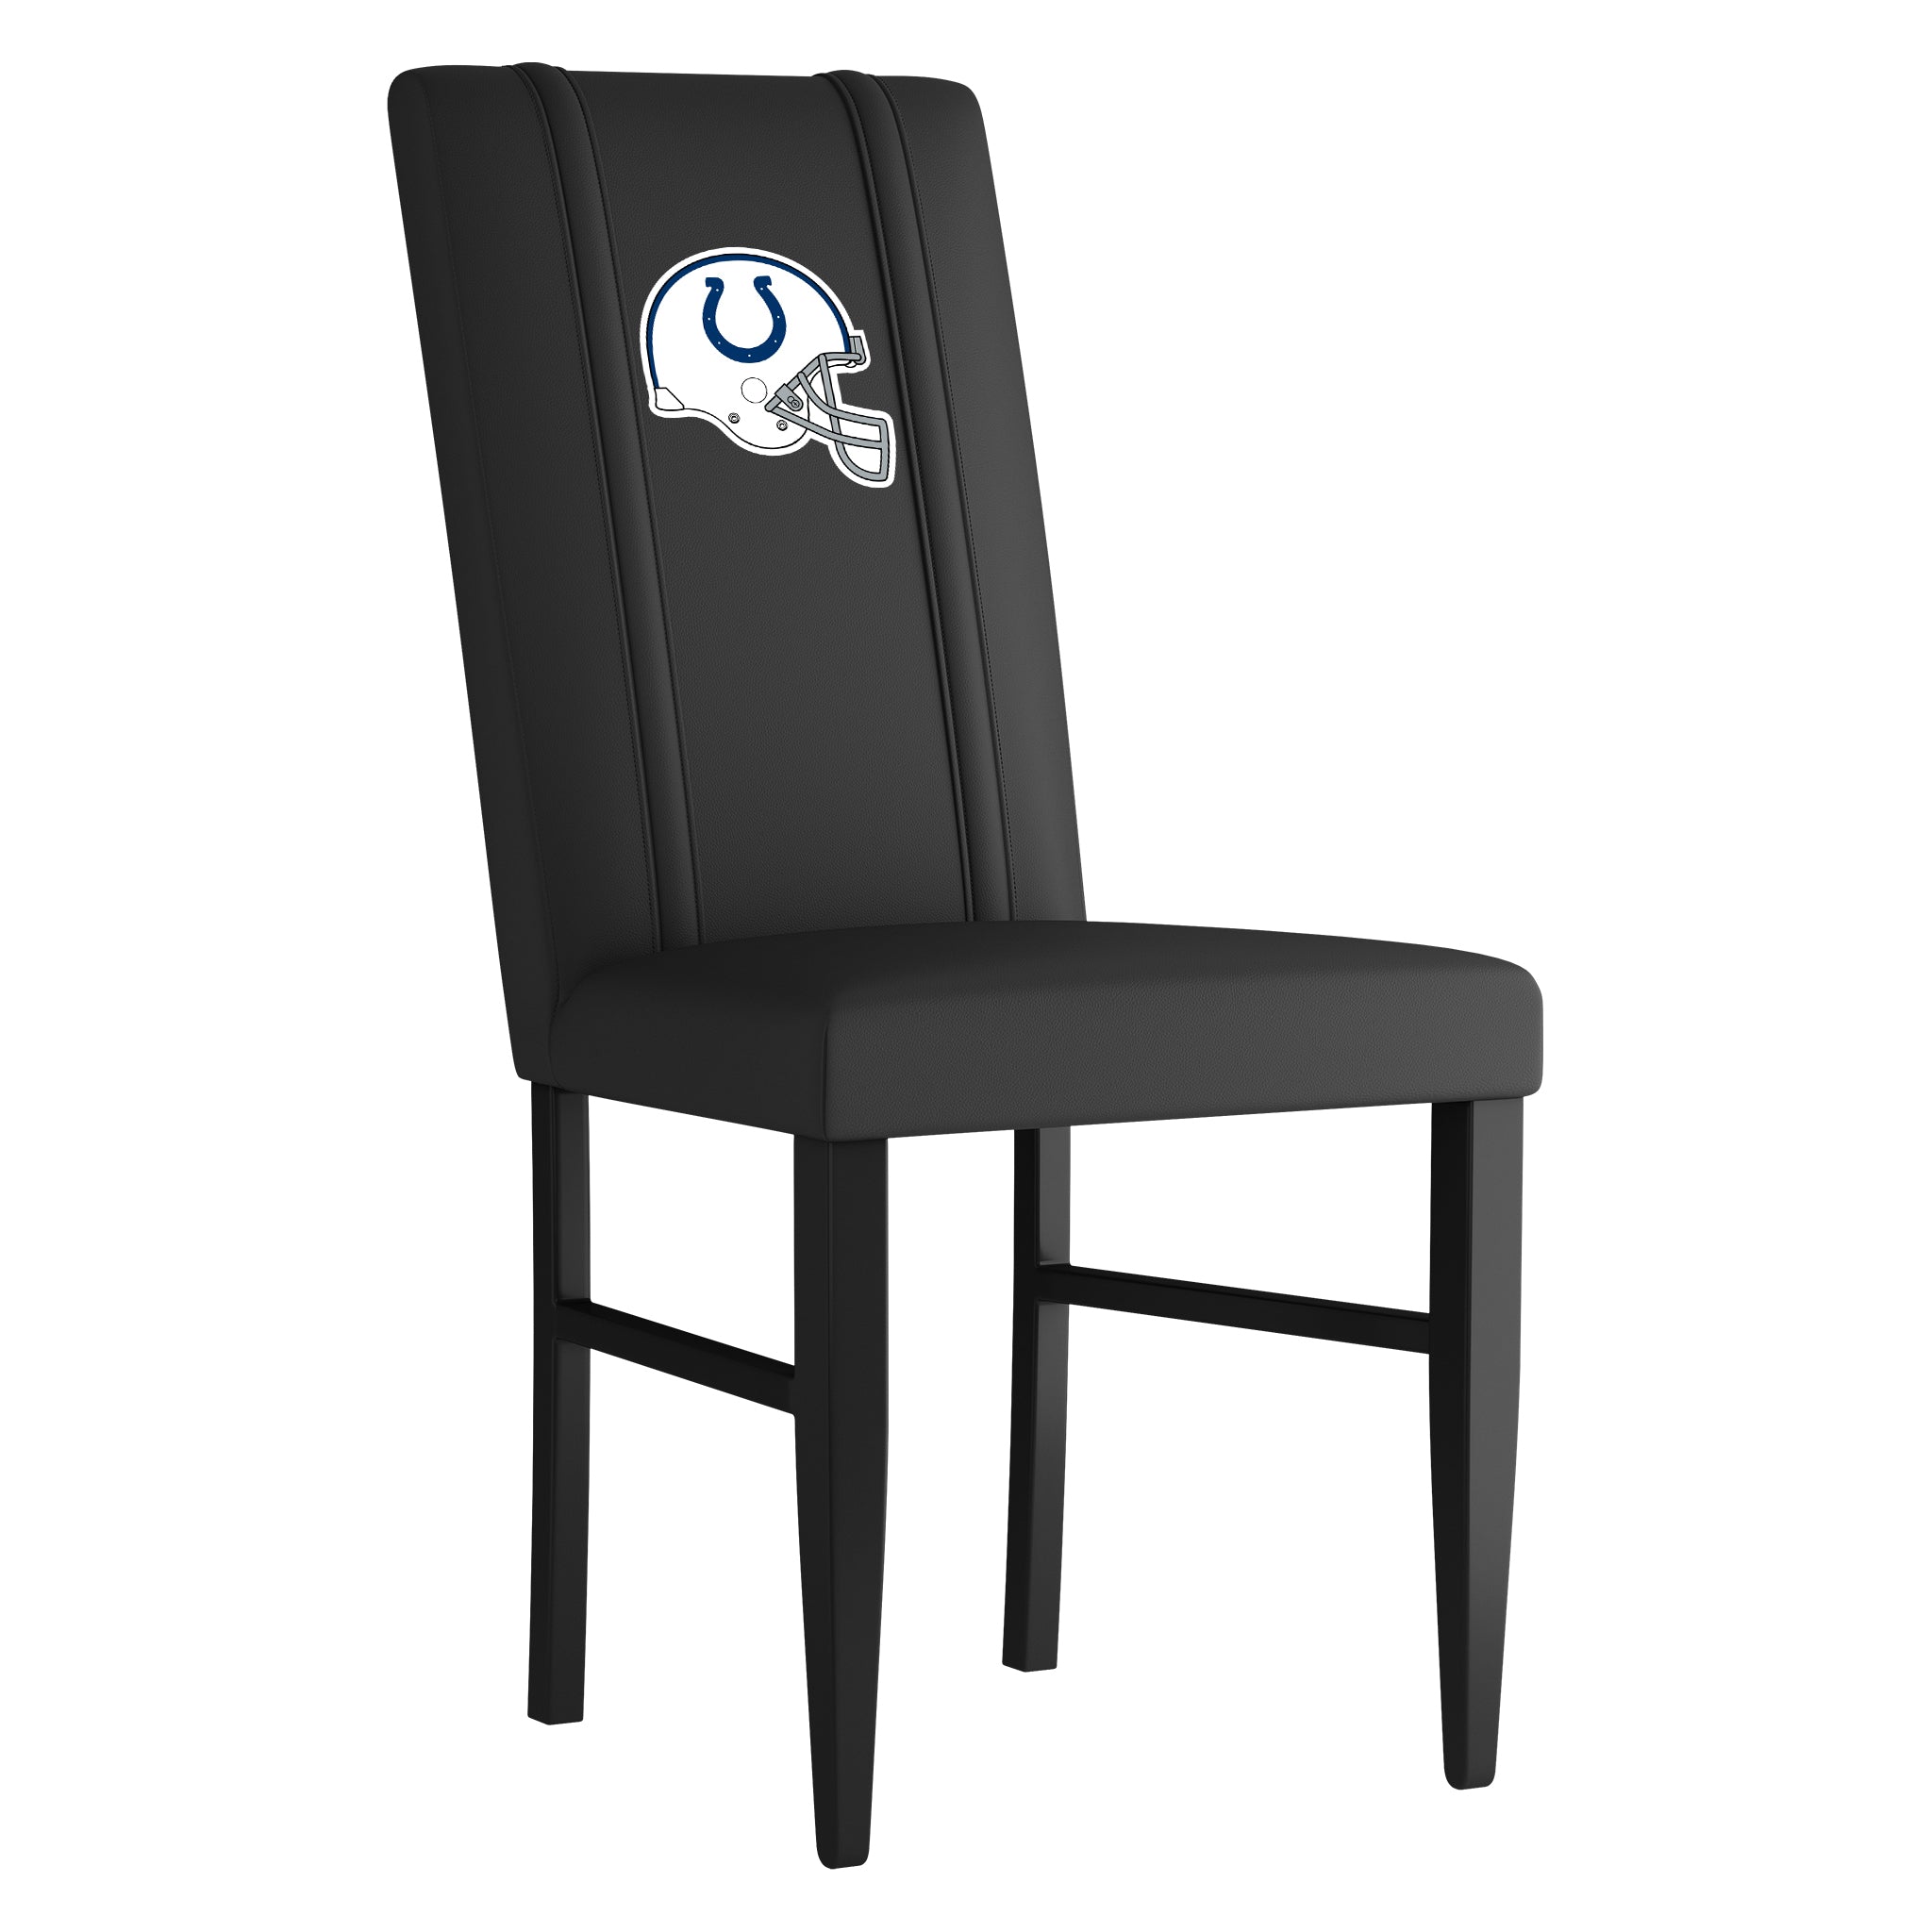 Indianapolis Colts Side Chair 2000